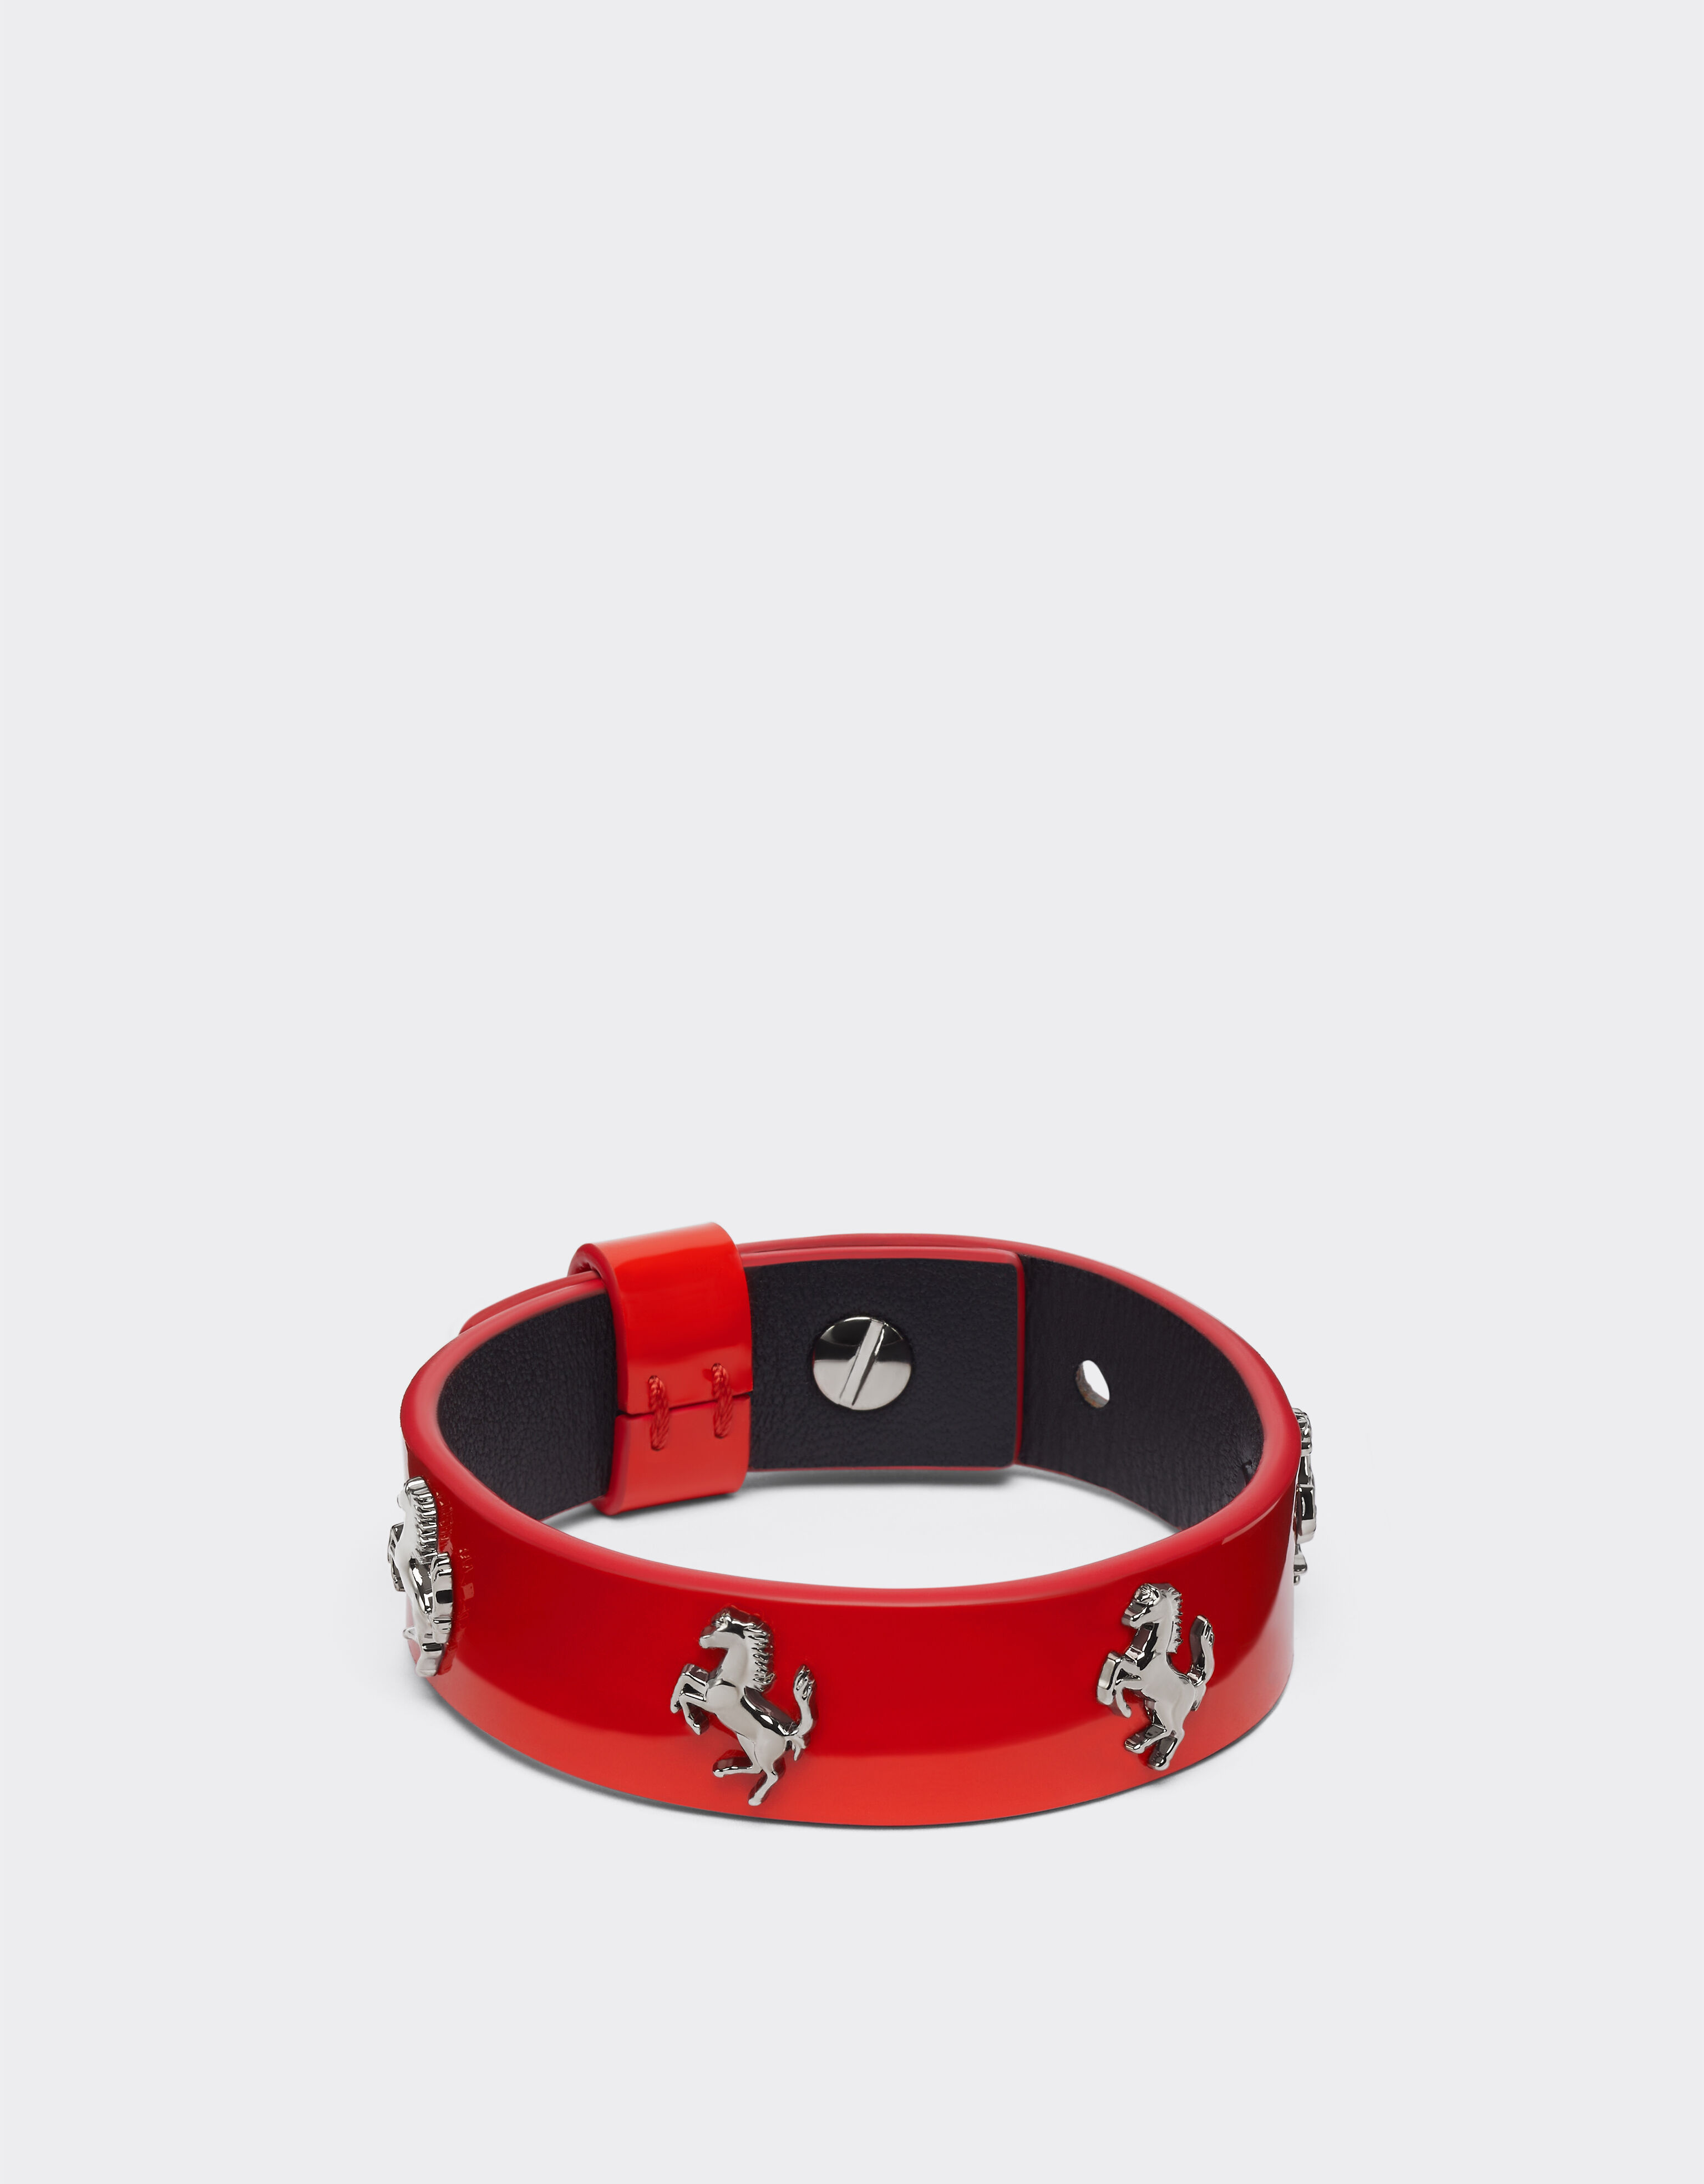 Ferrari Bracelet in red patent leather with studs Black 47427f